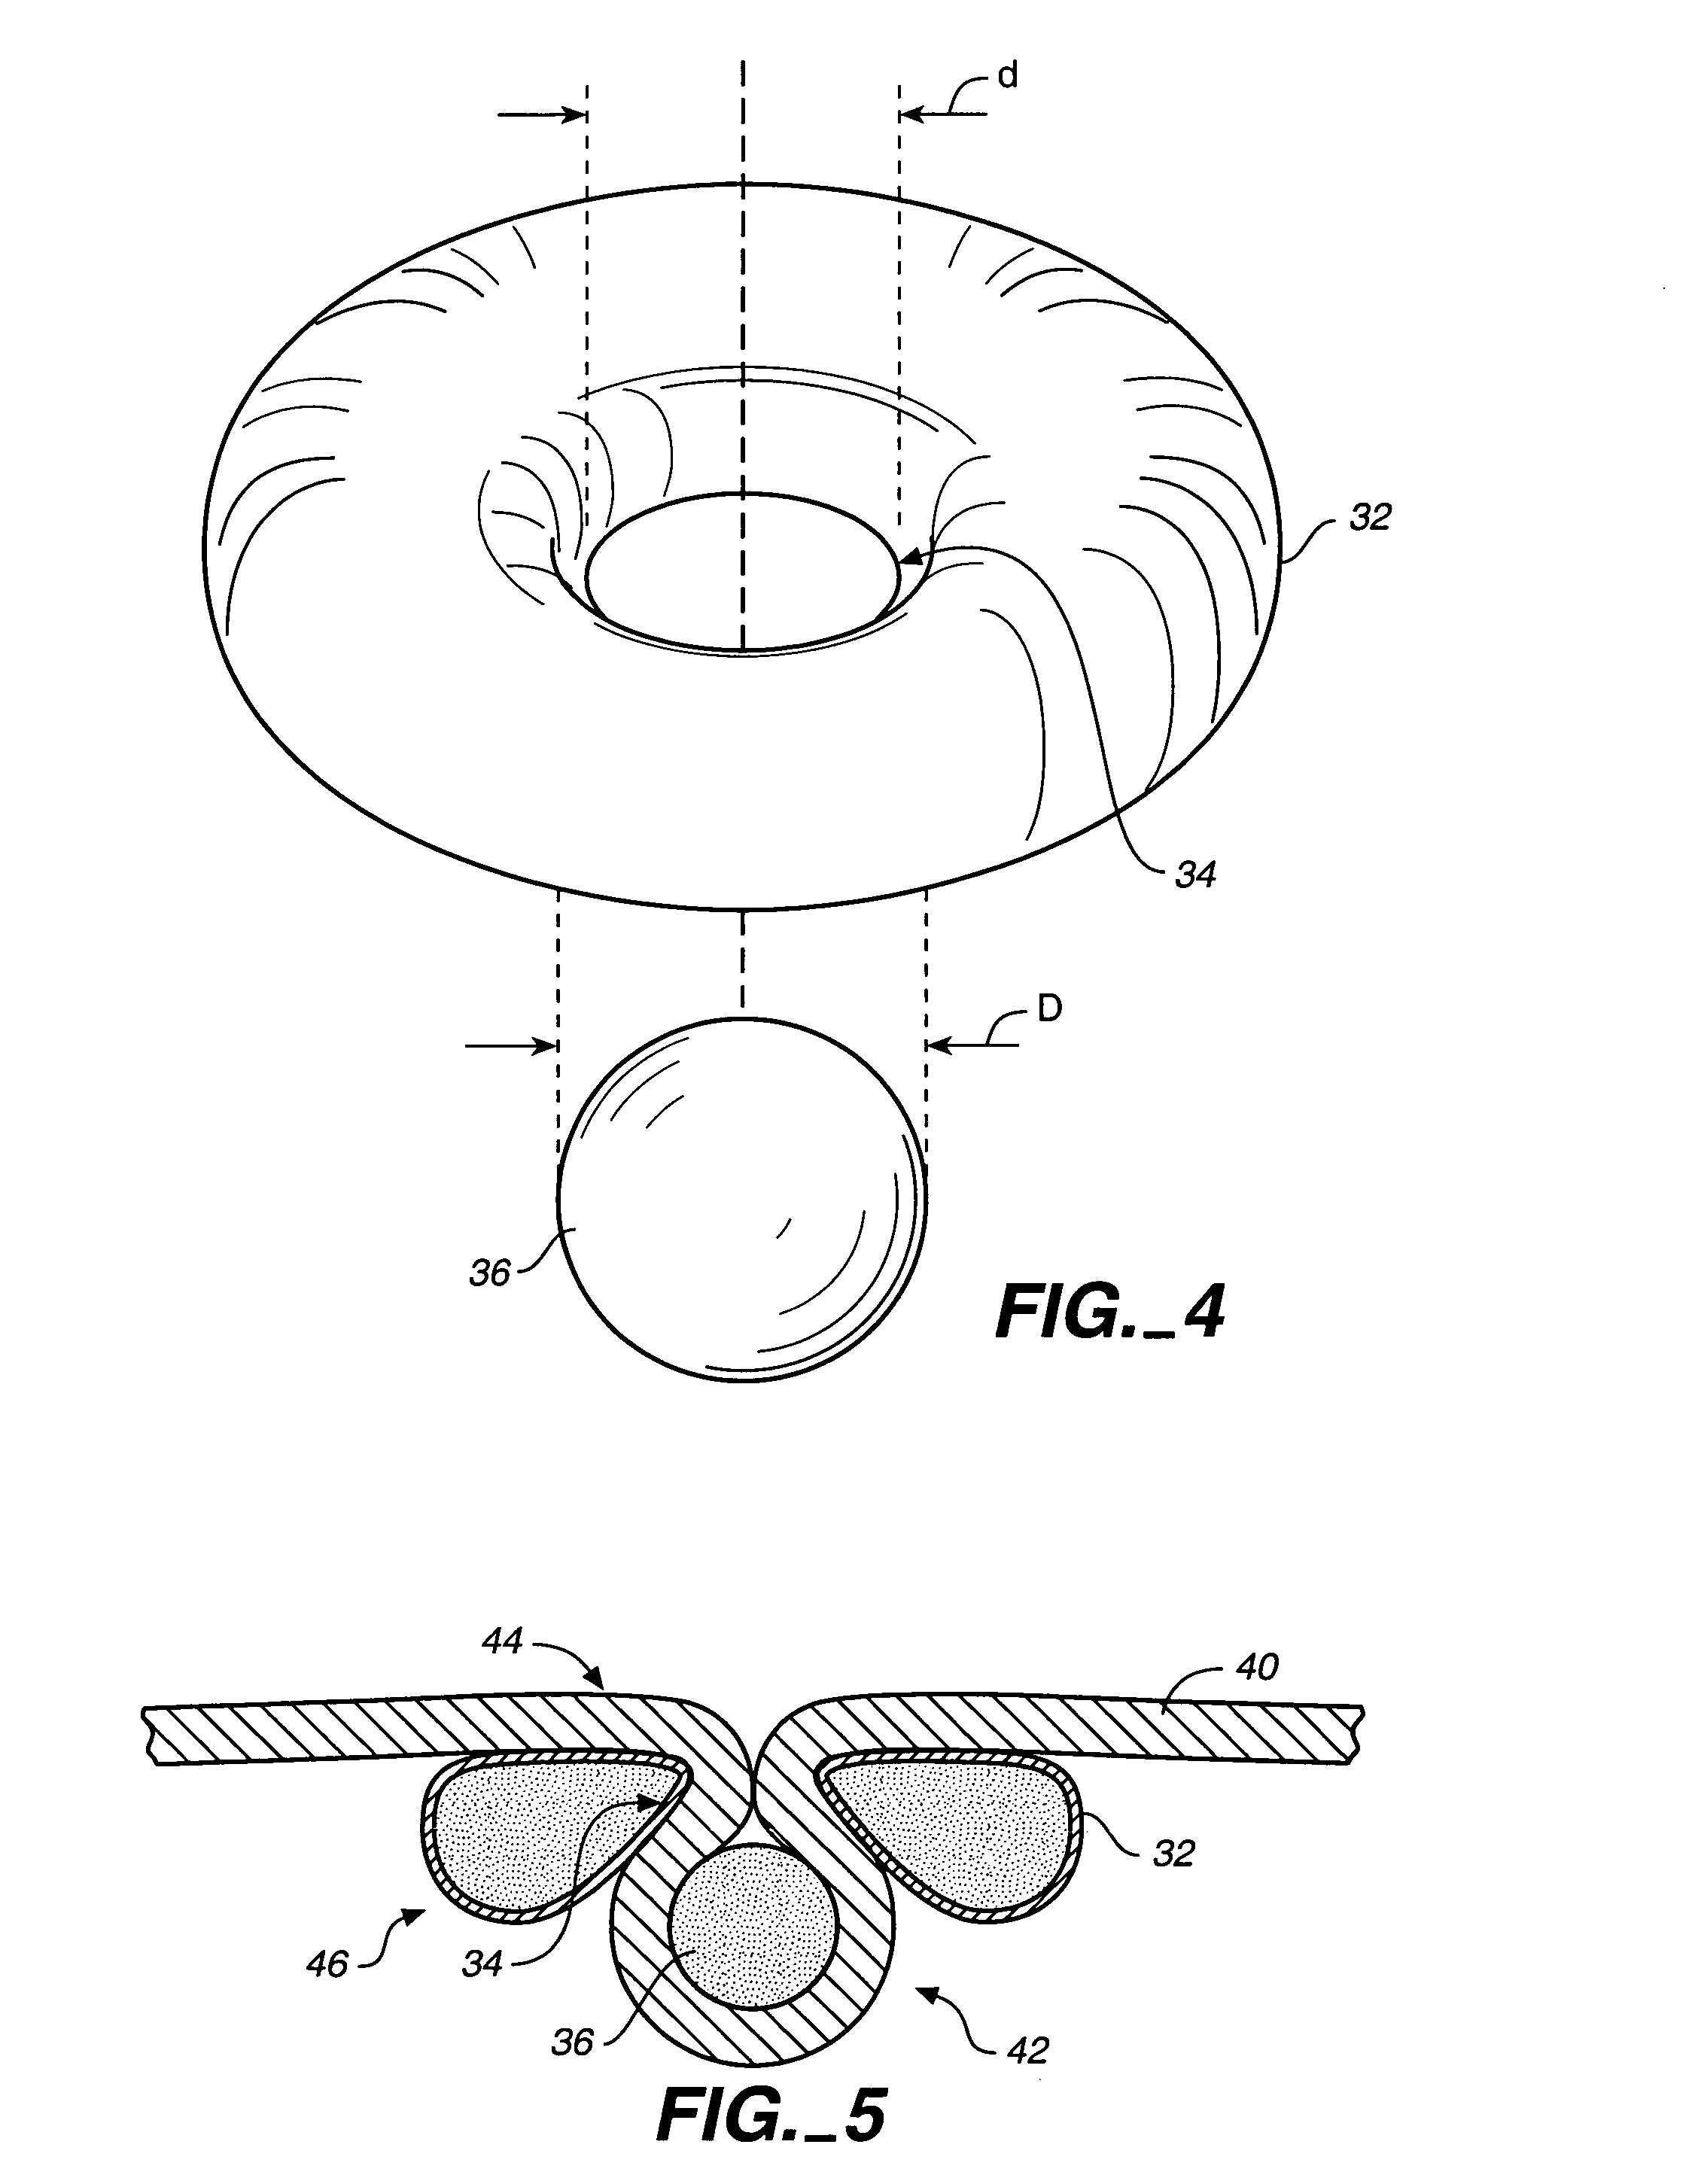 Methods and devices for maintaining a space occupying device in a relatively fixed location within a stomach